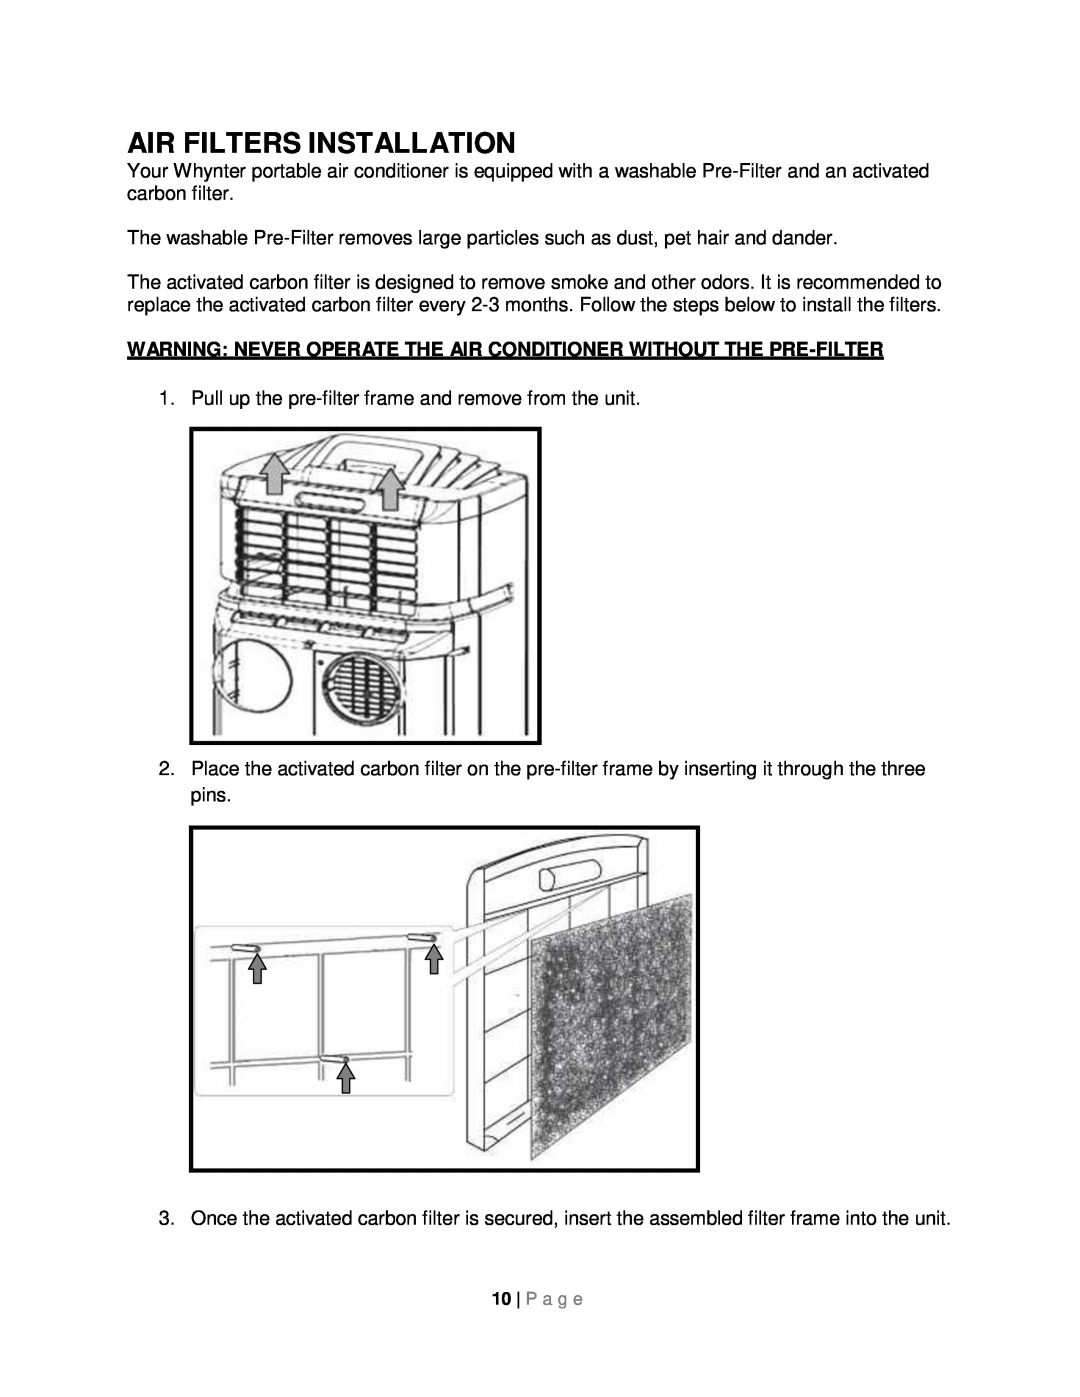 Whynter ARC-131GD instruction manual Air Filters Installation, P a g e 